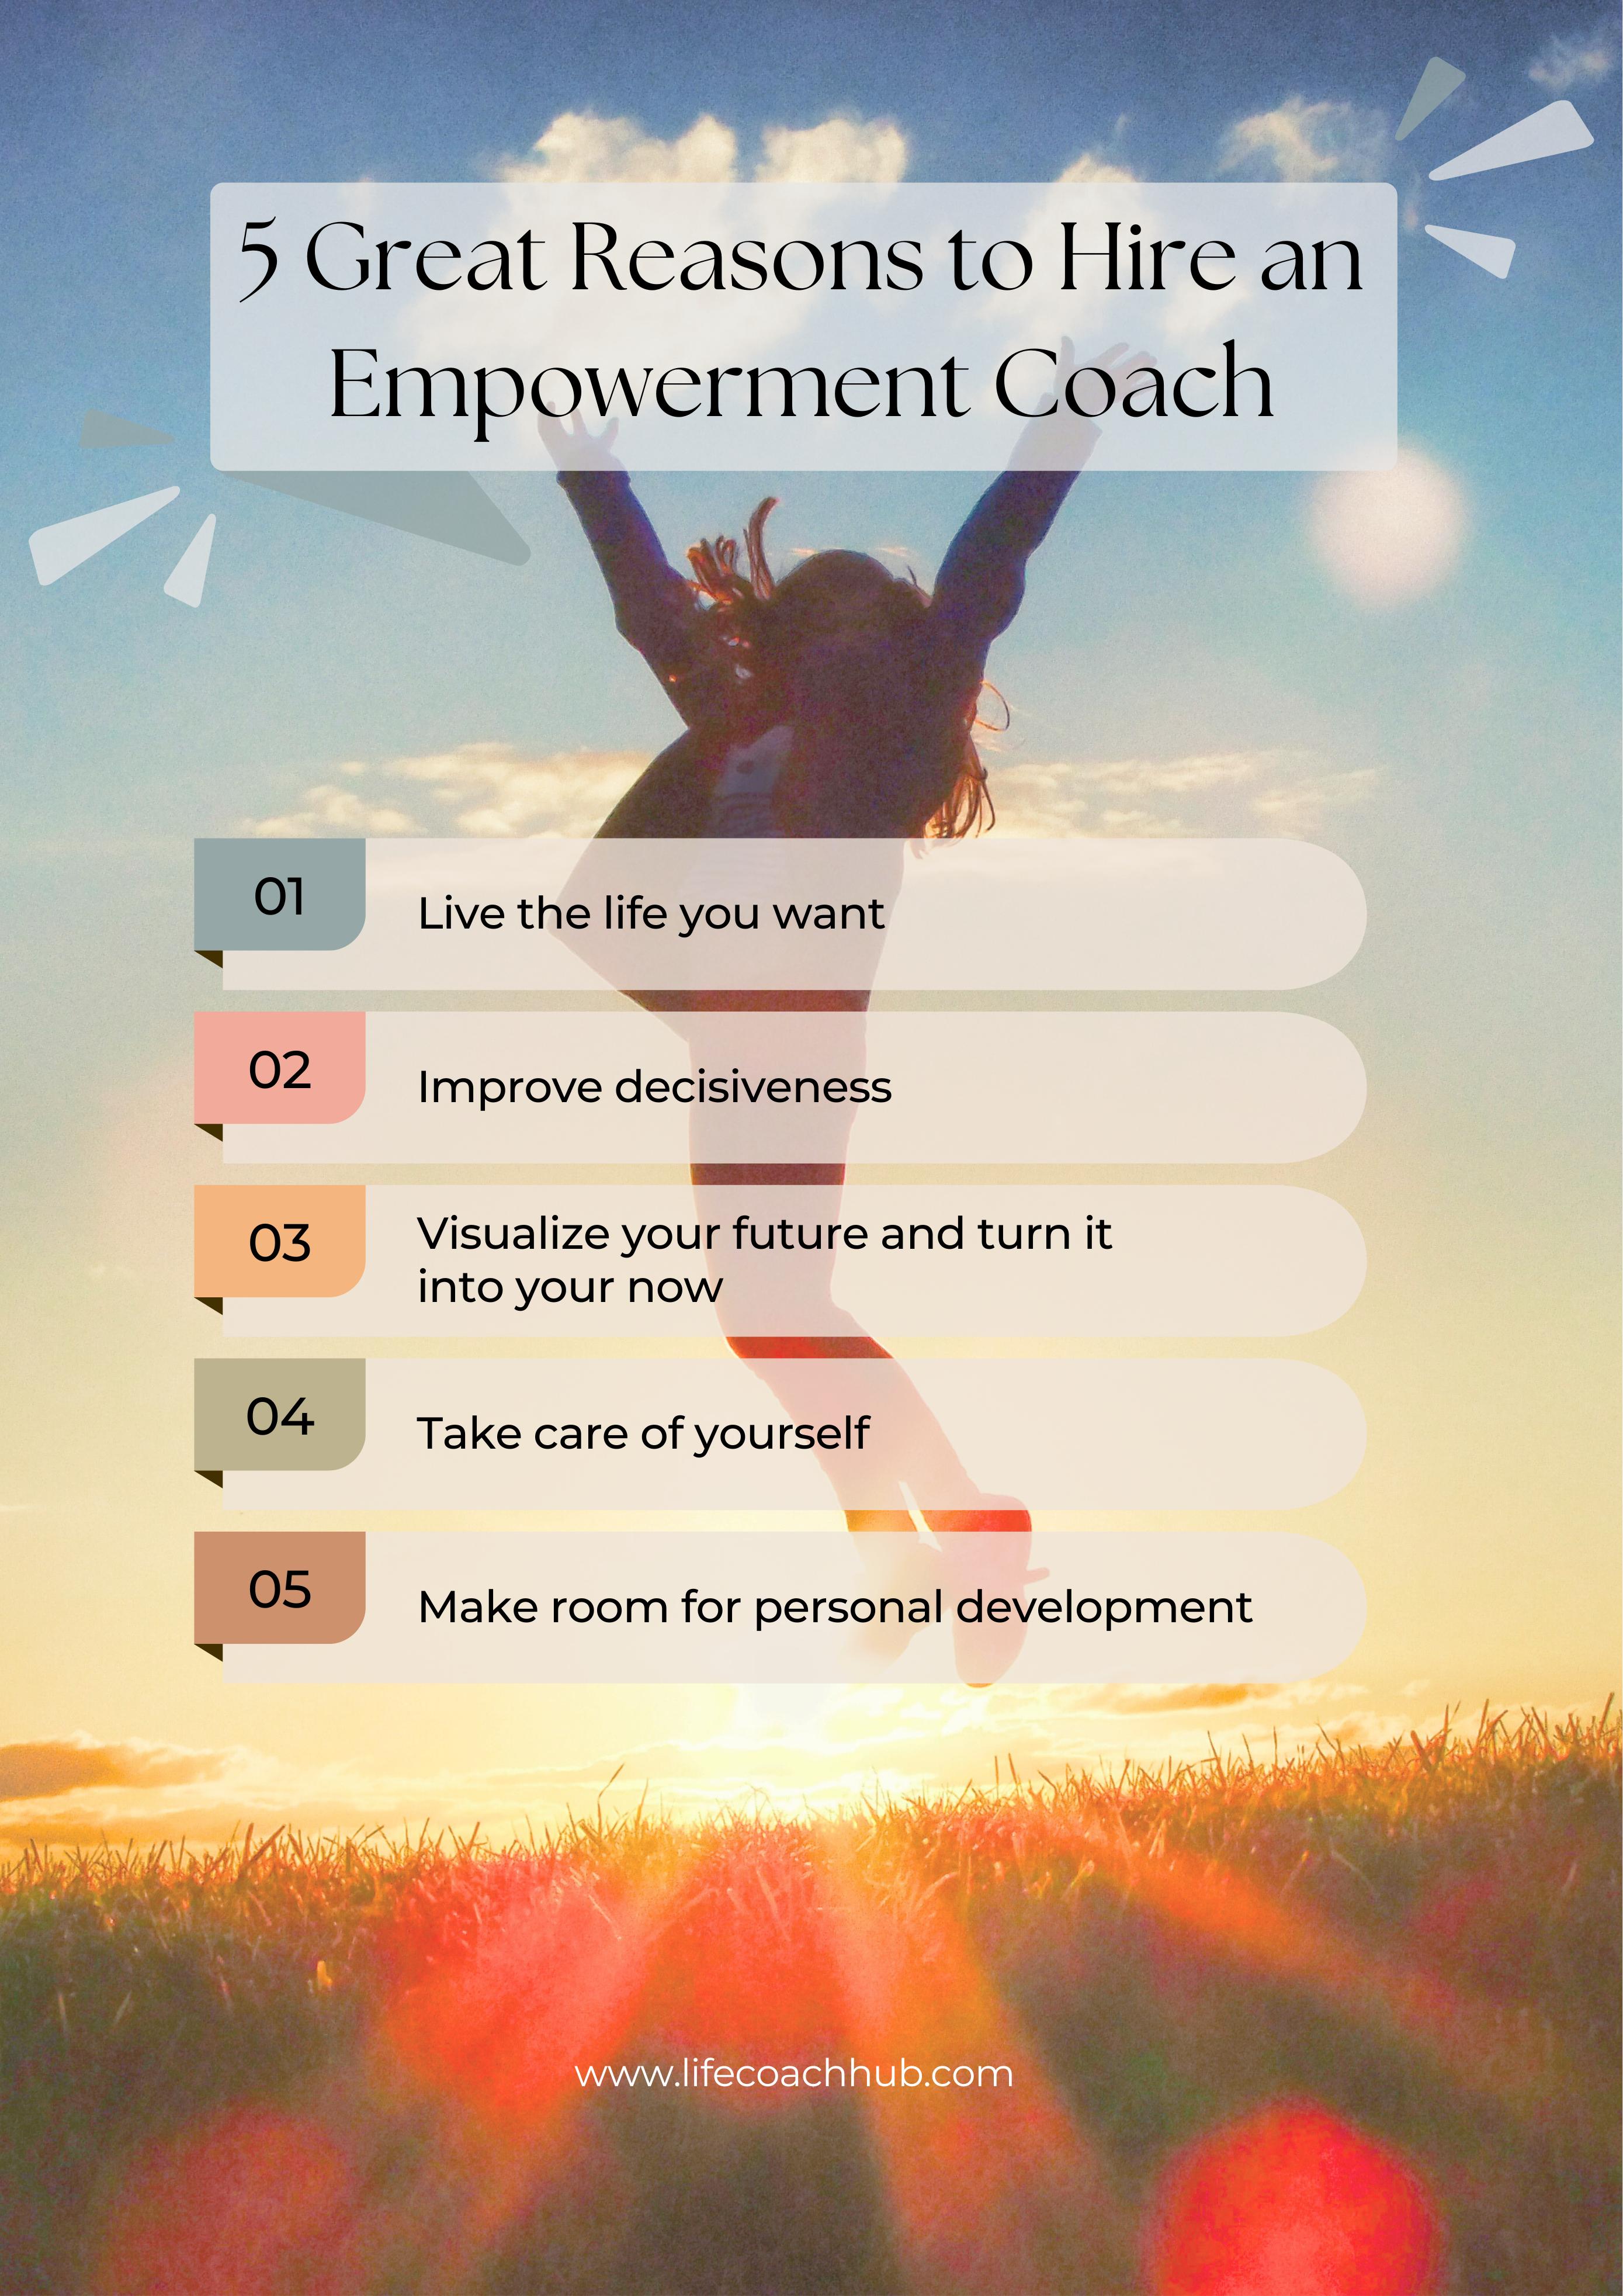 5 great reasons to hire an empowerment coach